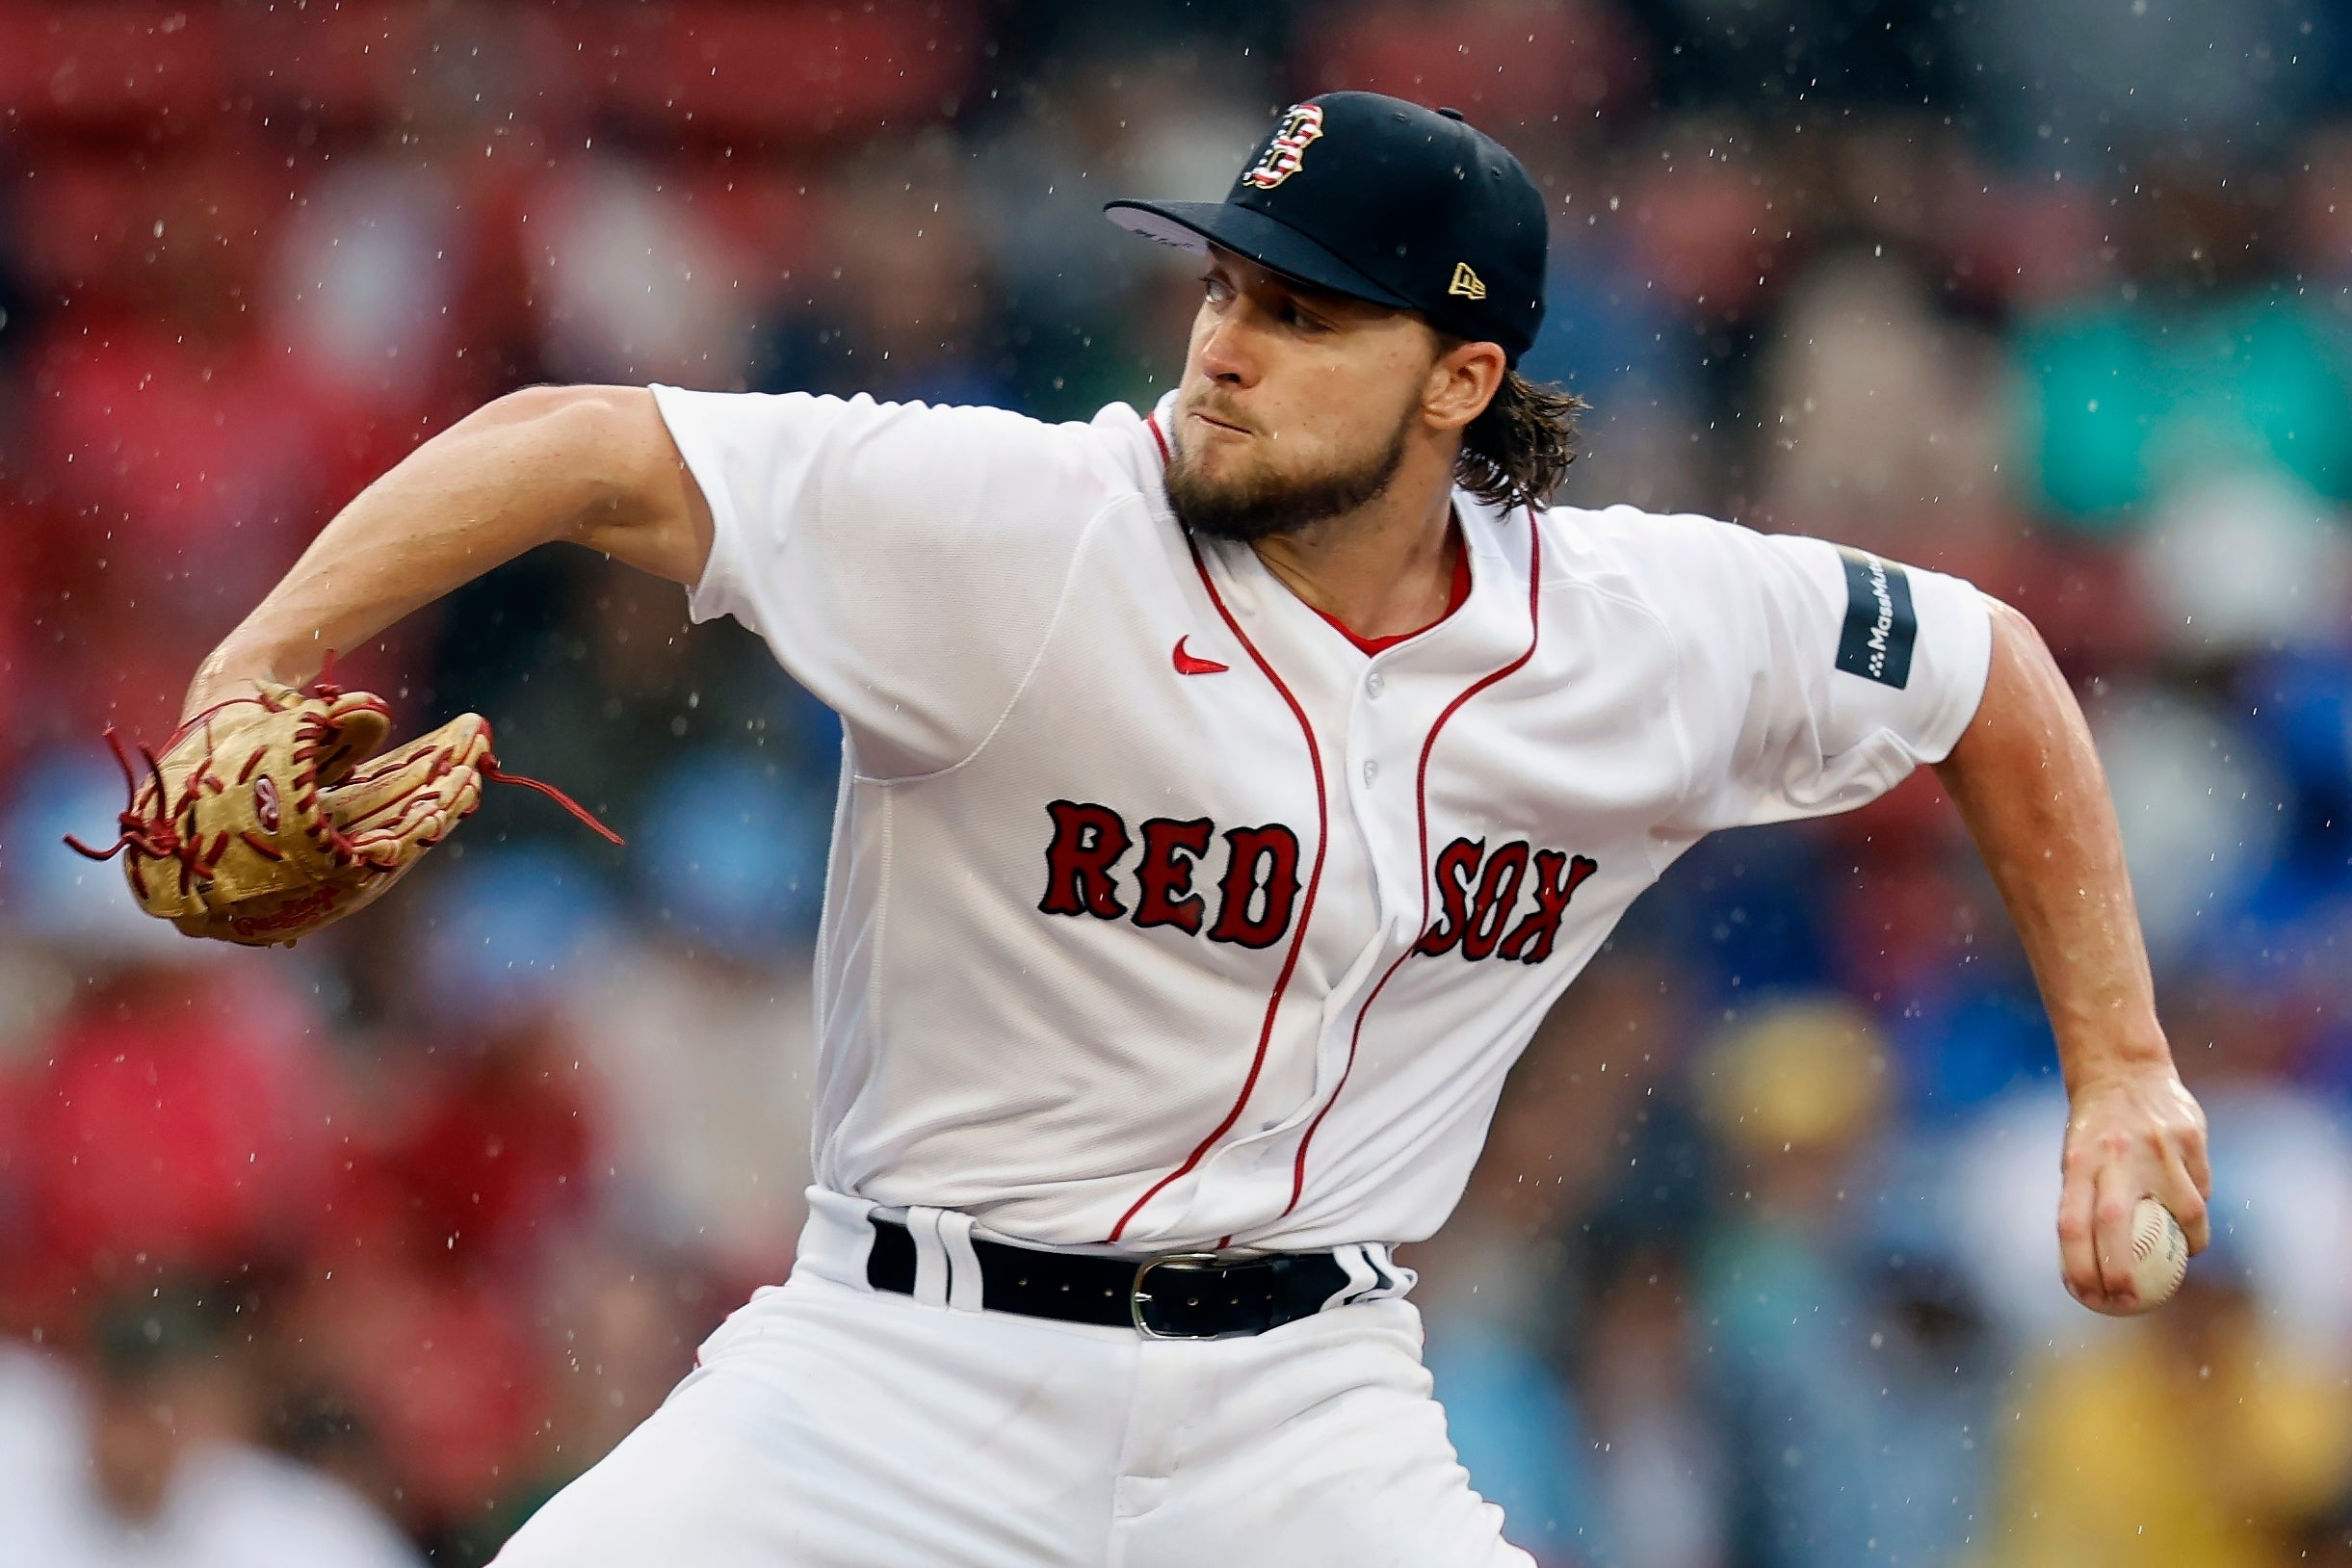 Here are the latest injury updates on a trio of Red Sox relievers